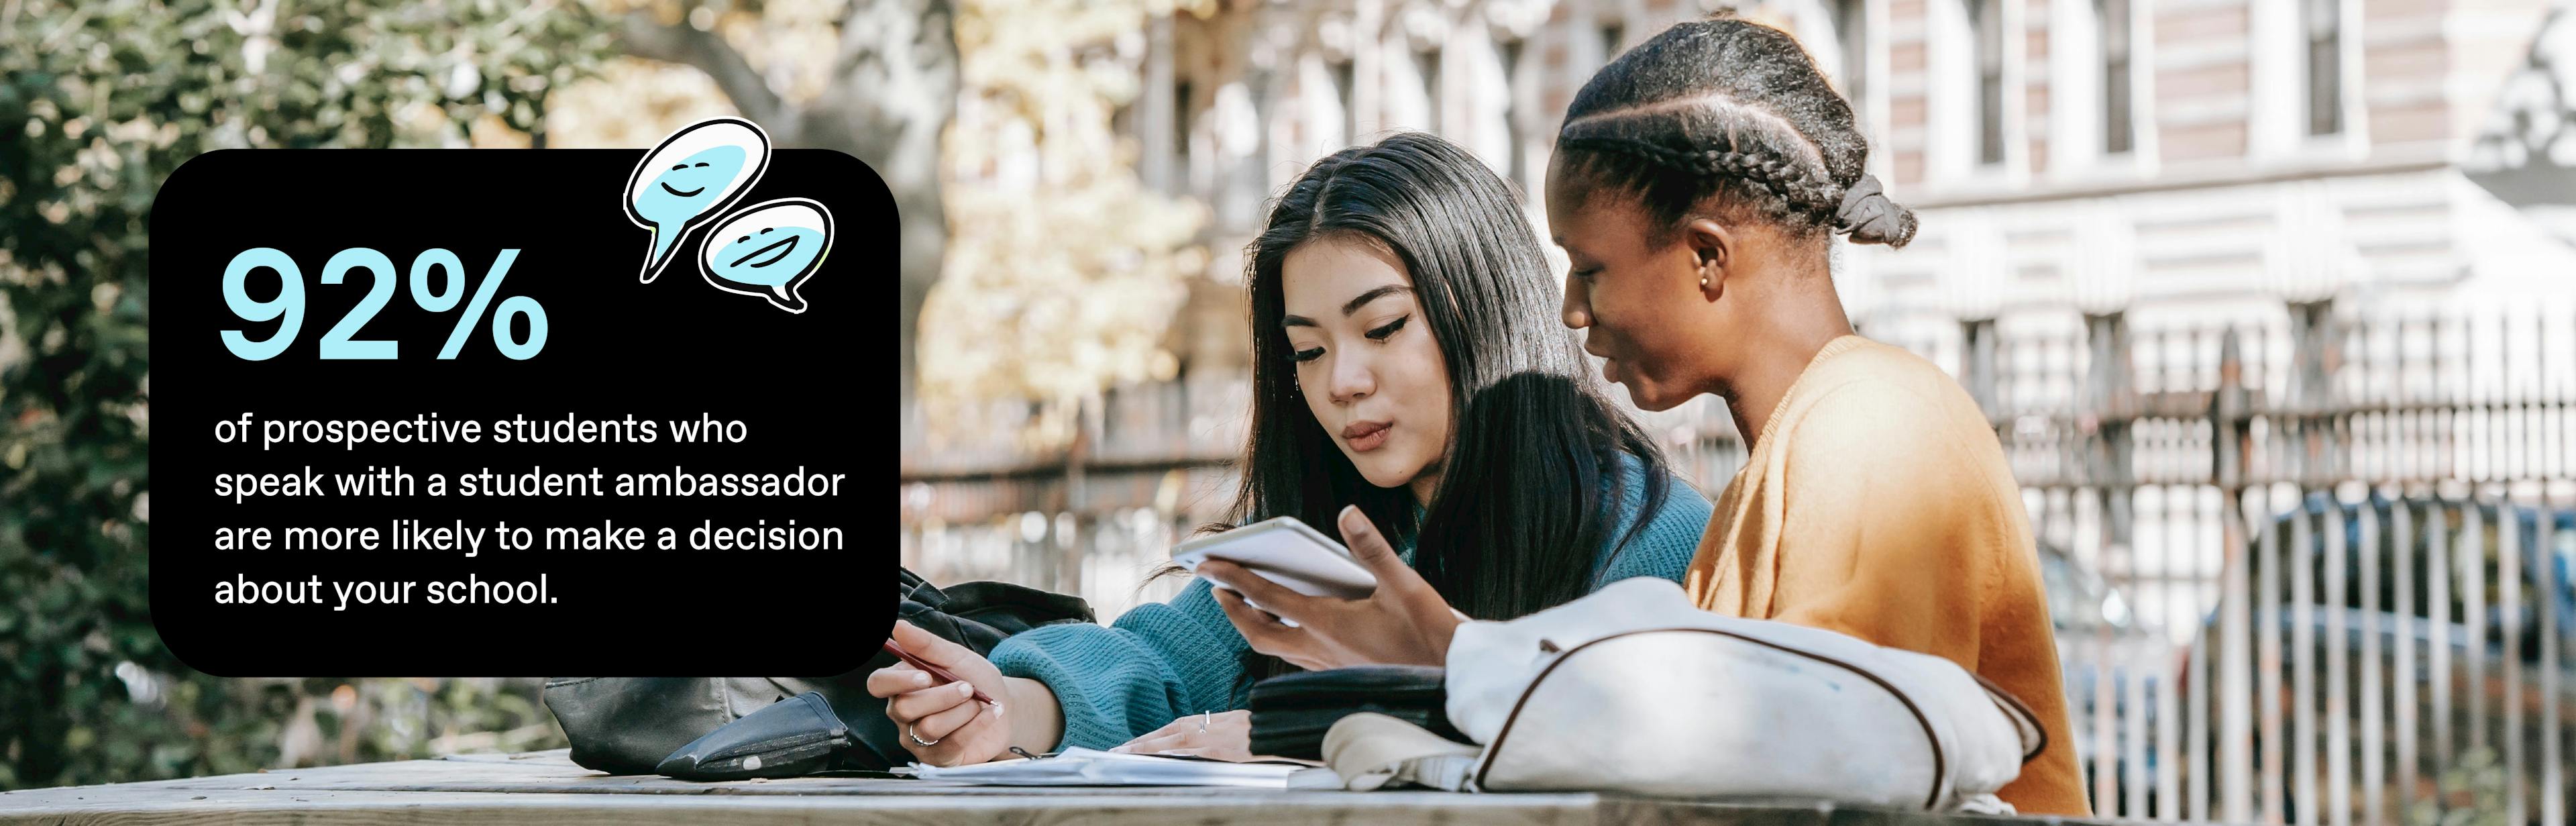 image of two students studying with text overlay reading "92% of prospective students who speak with a student ambassador are more likely to make a decision about your school"